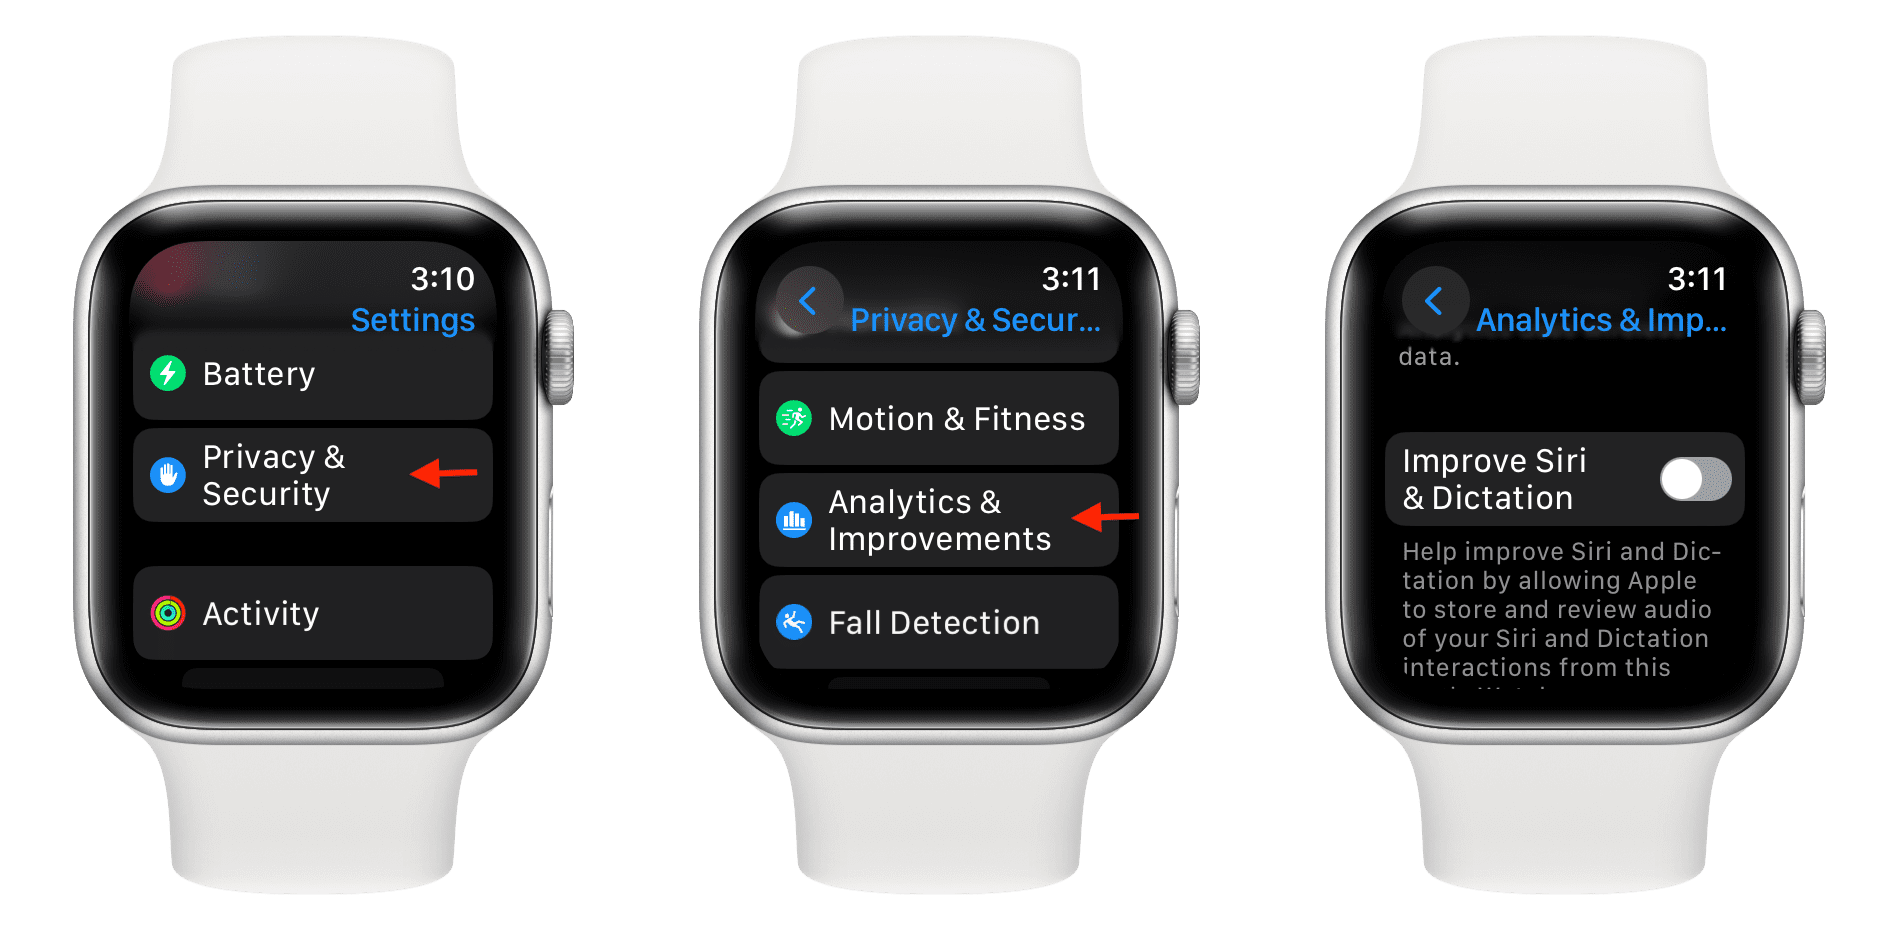 Turn off Improve Siri and Dictation on Apple Watch